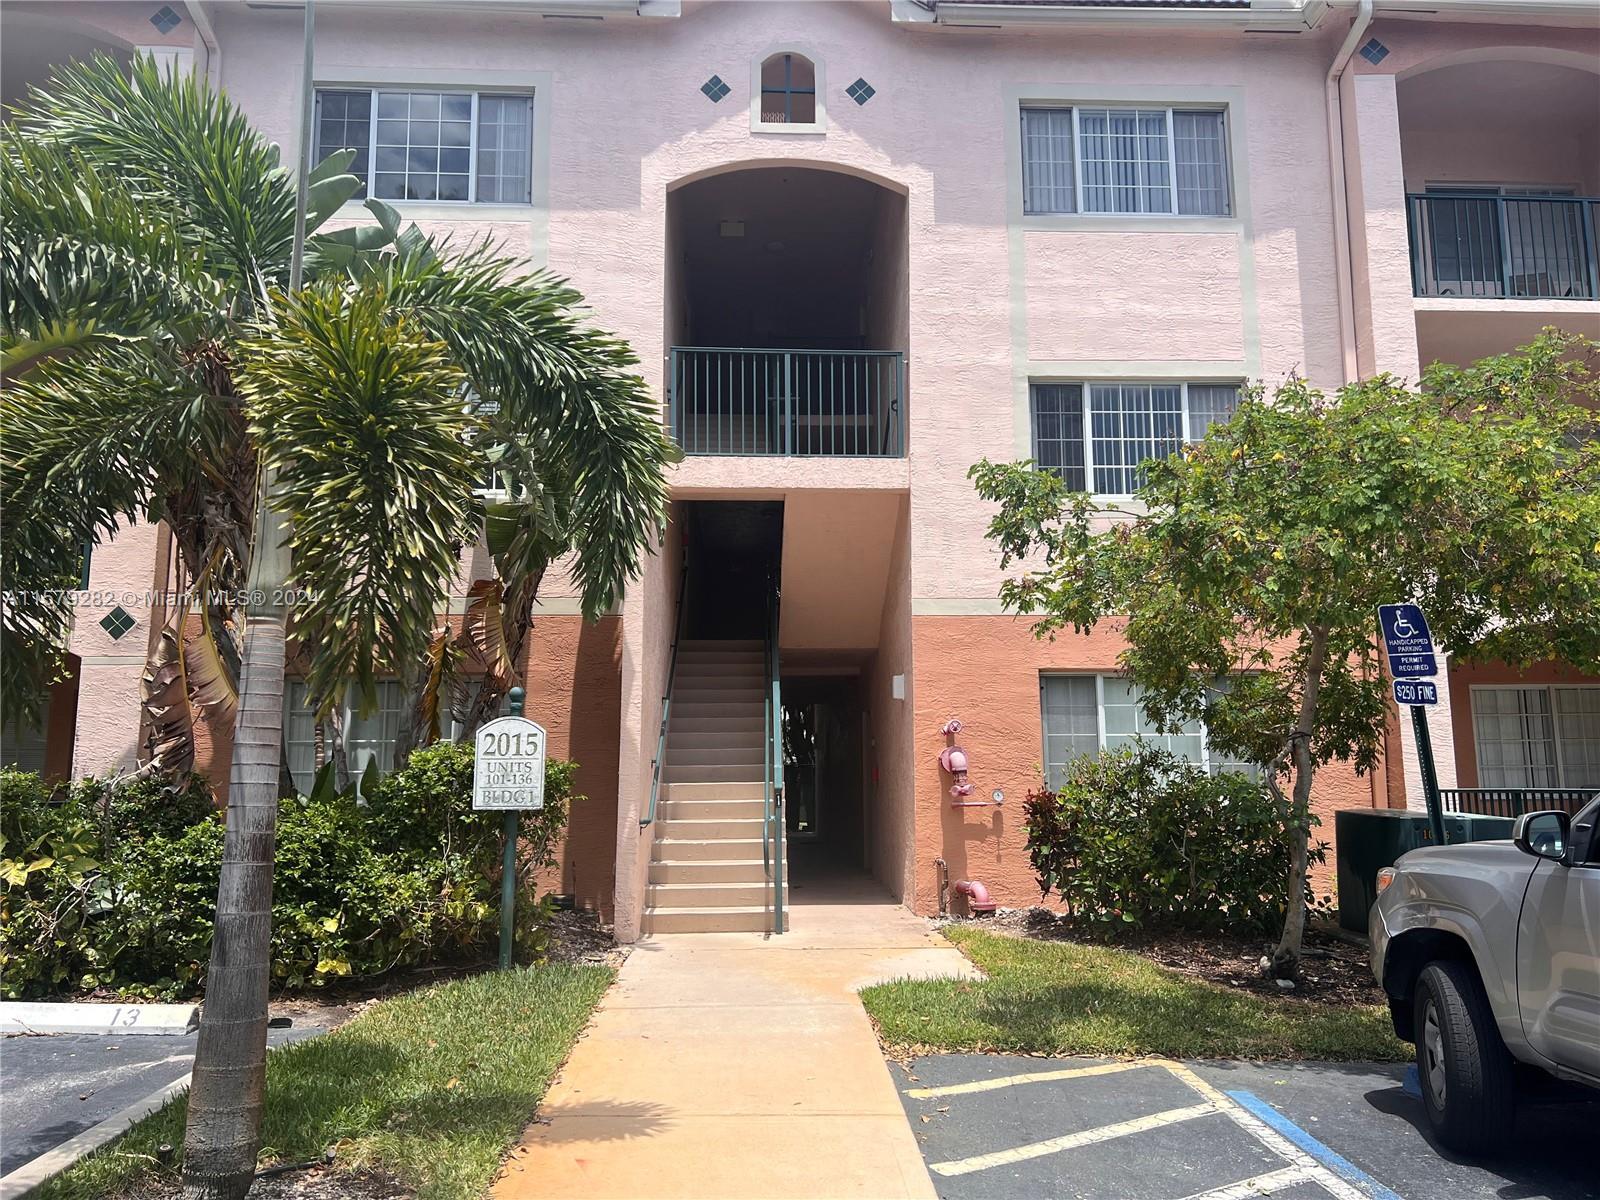 Photo of 2015 SE 10th Ave #116 in Fort Lauderdale, FL